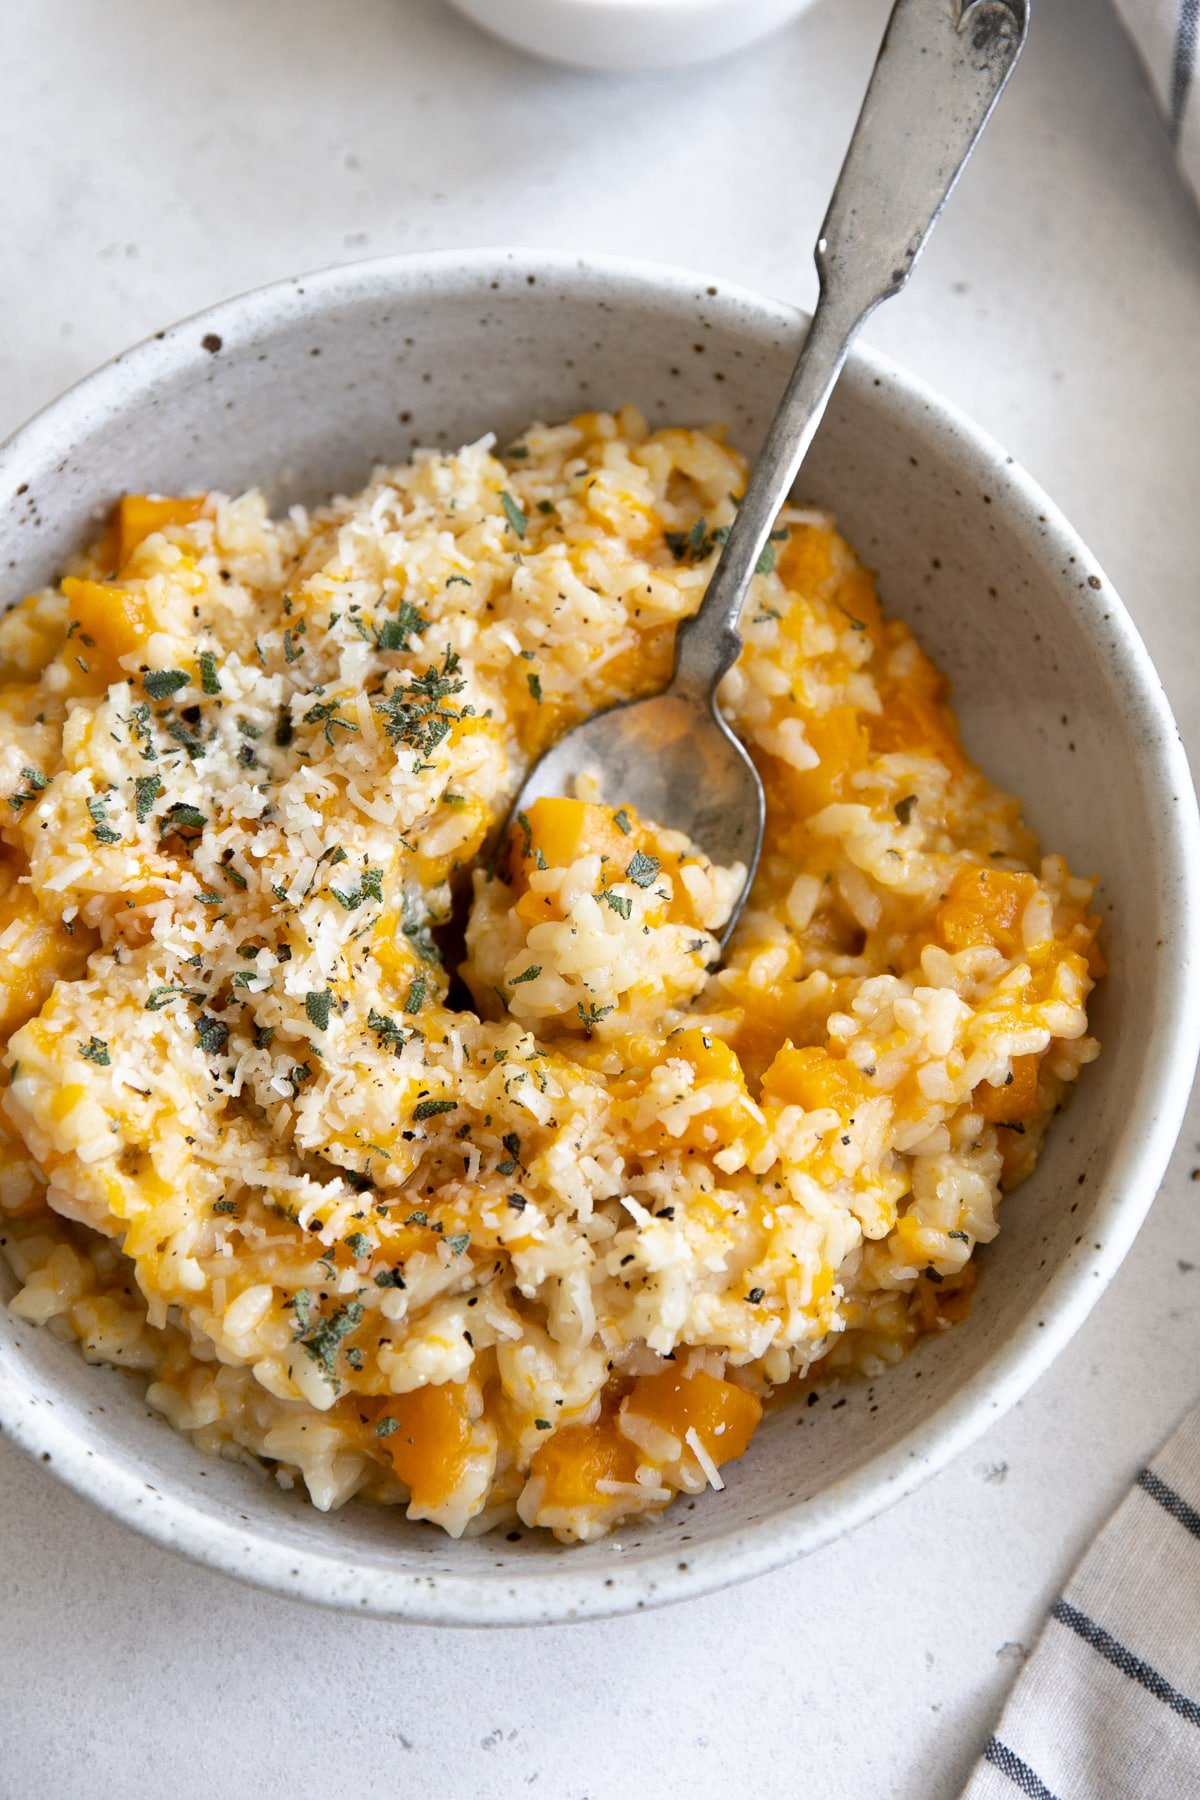 Easy Instant Pot Risotto with Butternut Squash - The Forked Spoon